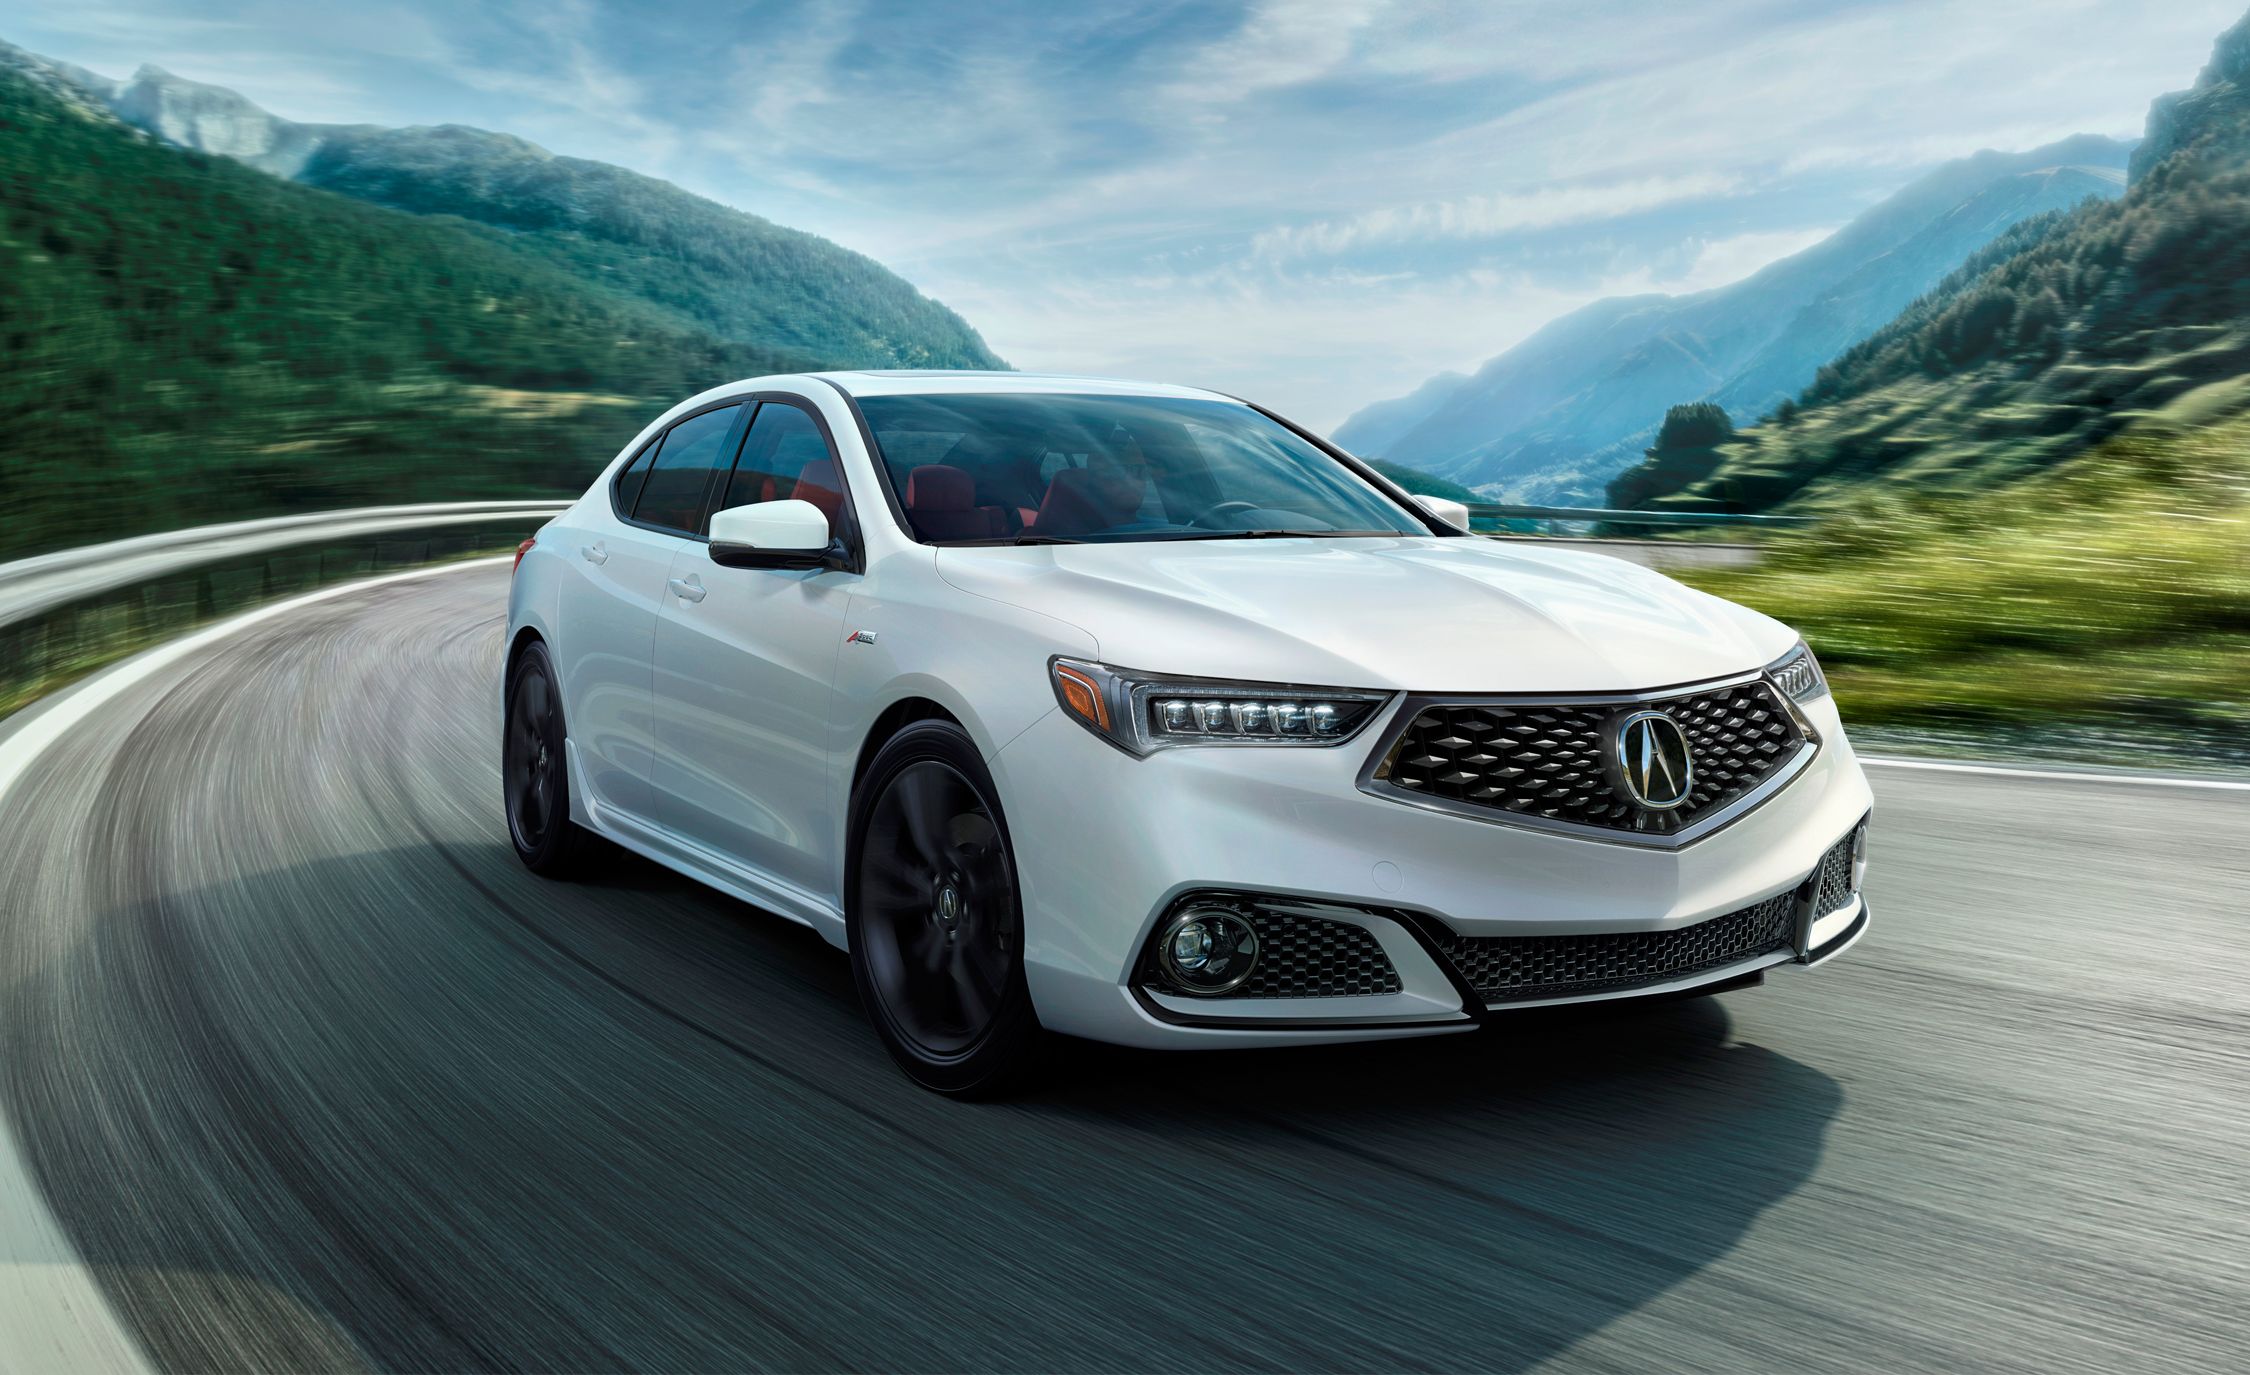 2018 Acura TLX Photos and Info | News | Car and Driver